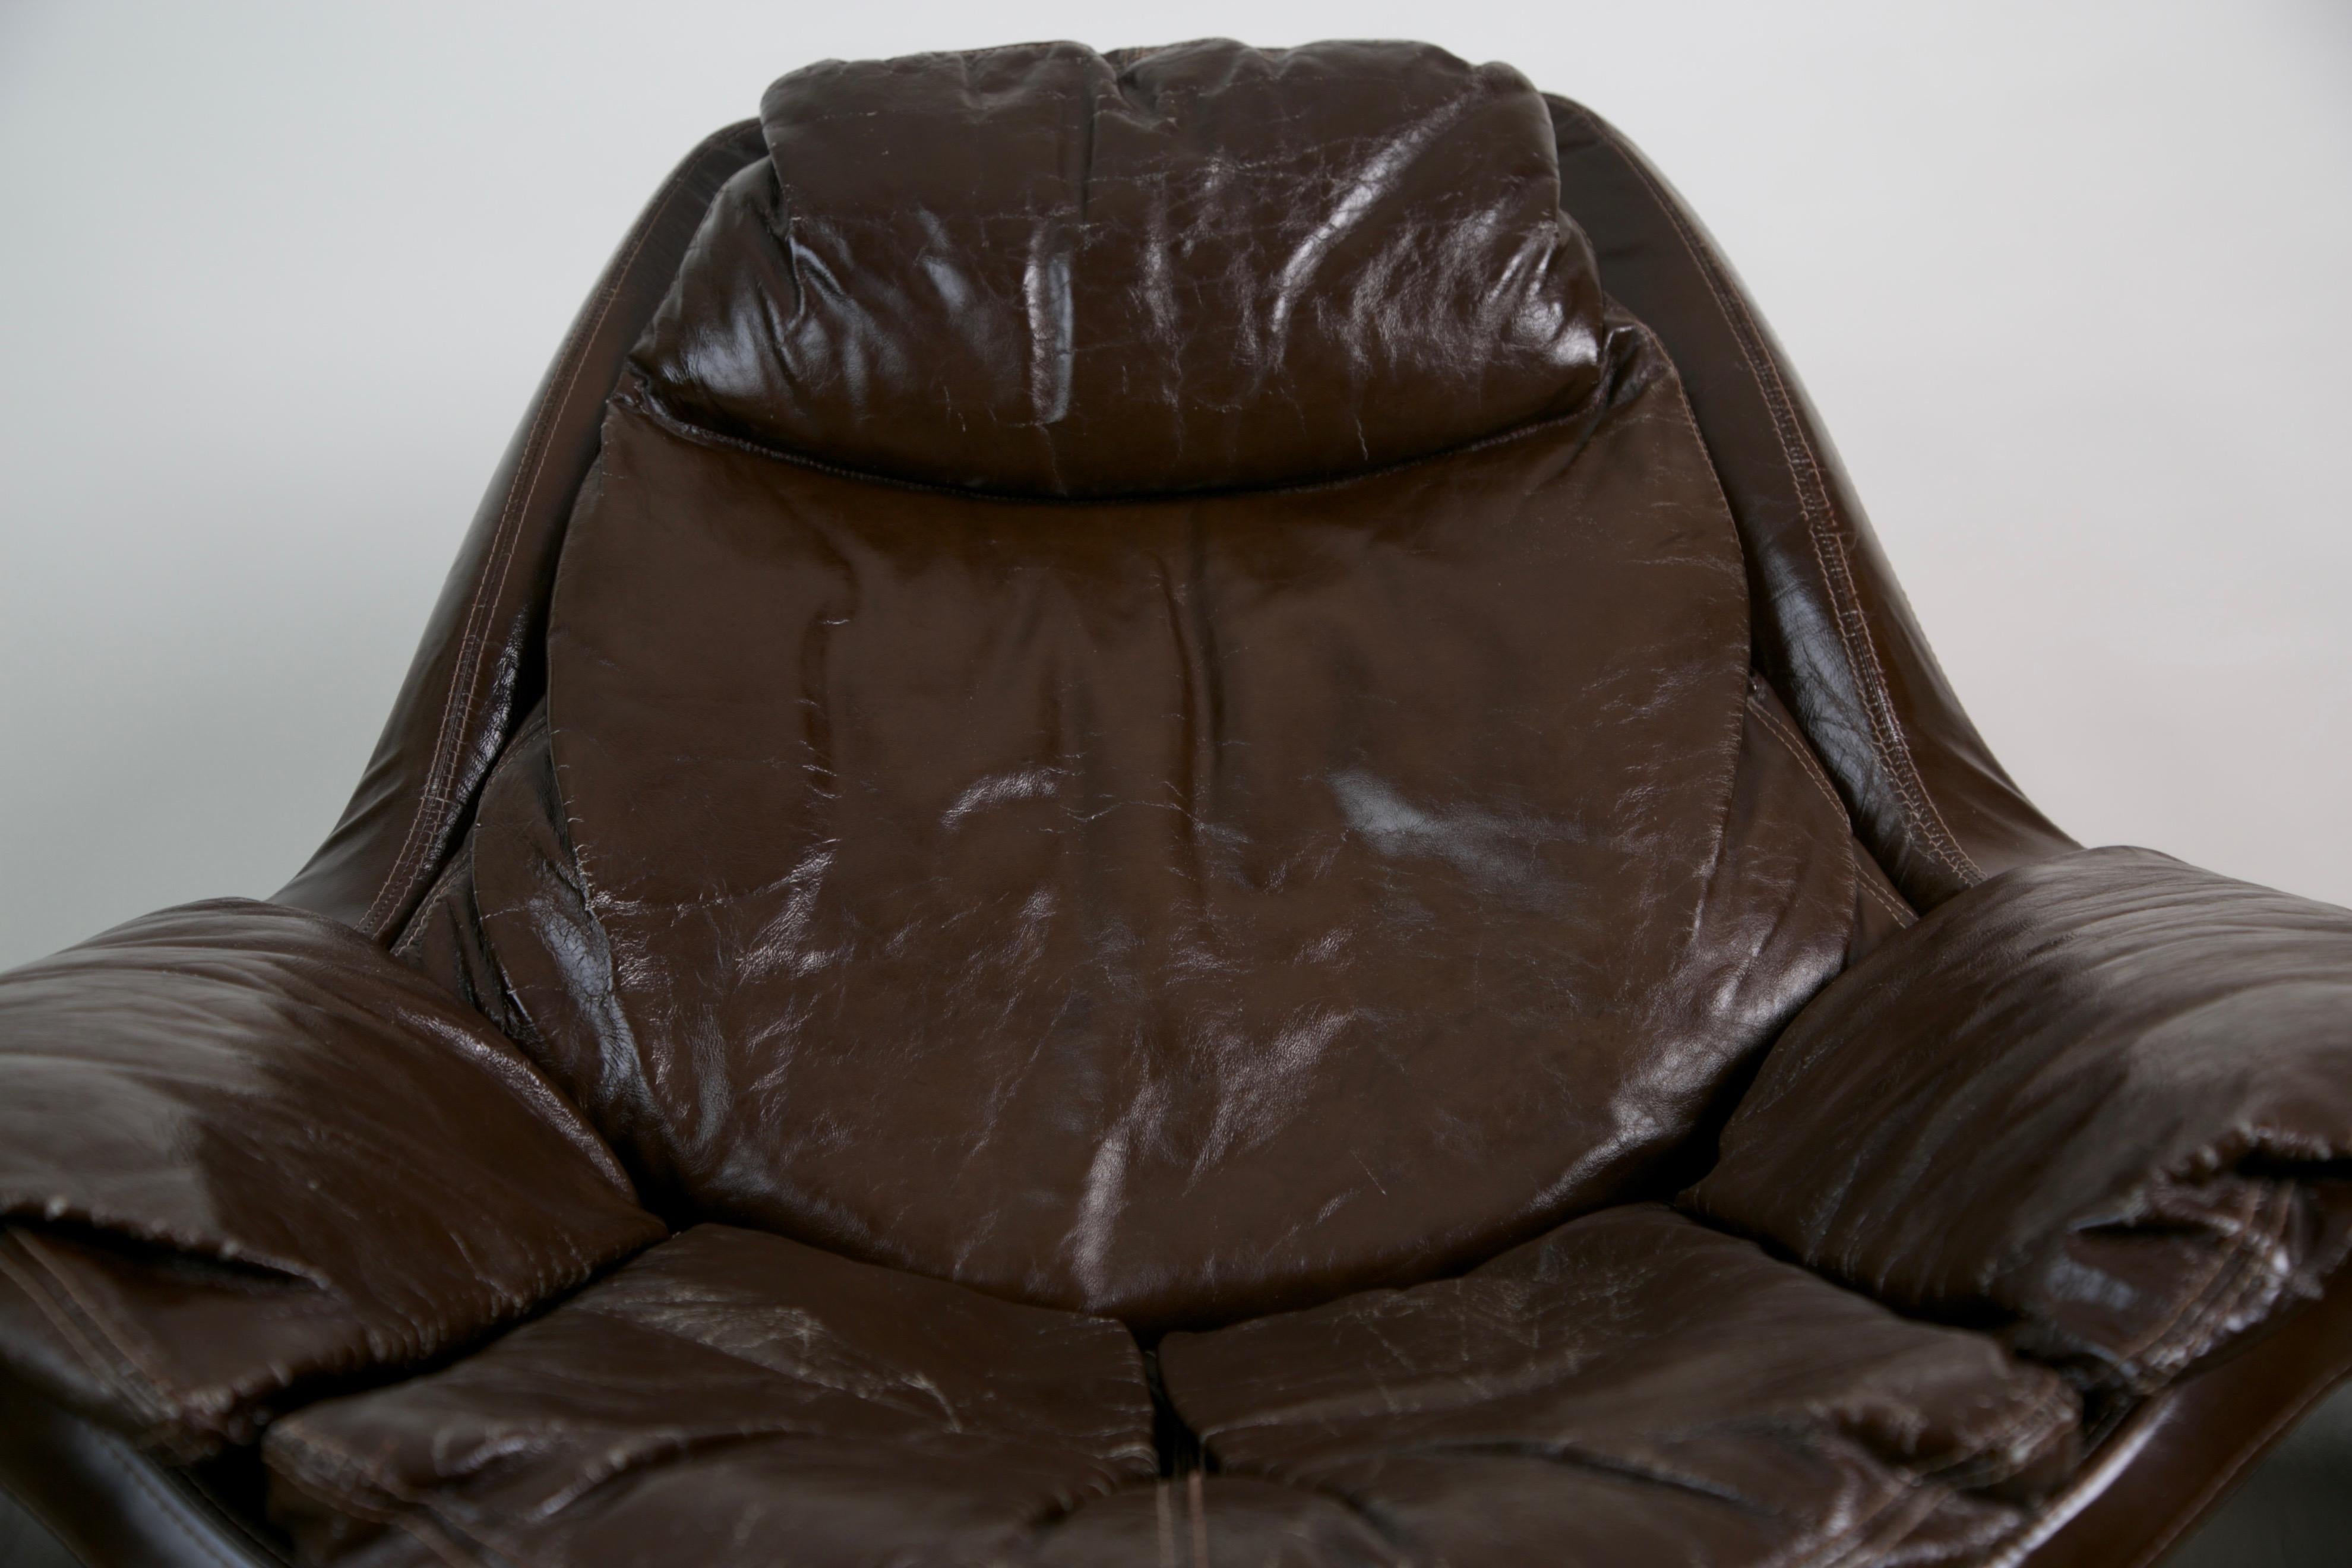 This model P-60 leather lounge chair and ottoman is part of the Proposals series, for Saporiti Italia, designed by Vittorio Introini in the 1960s. The glossy dark brown leather has the feel of patent leather which provides a swank, comfortable and